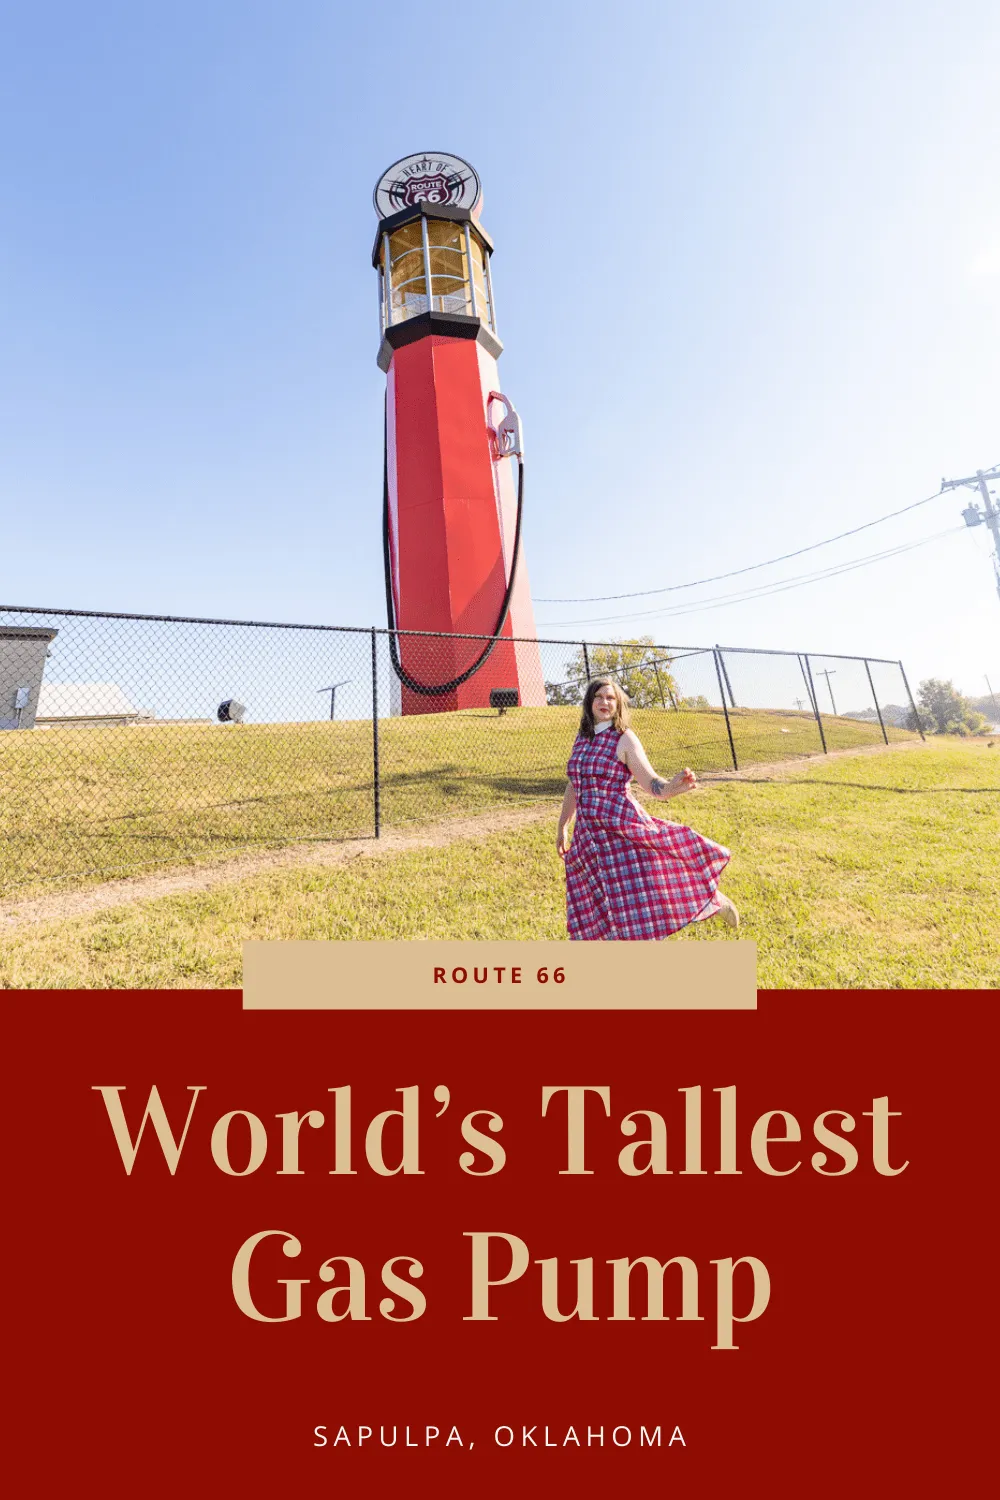 If you’re driving the full length of Route 66, you’re going to need plenty of gas. Maybe even enough to fill this roadside attraction: the World’s Tallest Gas Pump in Sapulpa, Oklahoma. Visit this Route 66 roadside attraction on a road trip to Oklahoma.    #RoadTrips #RoadTripStop #Route66 #Route66RoadTrip #OklahomaRoute66 #Oklahoma #OklahomaRoadTrip #OklahomaRoadsideAttractions #RoadsideAttractions #RoadsideAttraction #RoadsideAmerica #RoadTrip